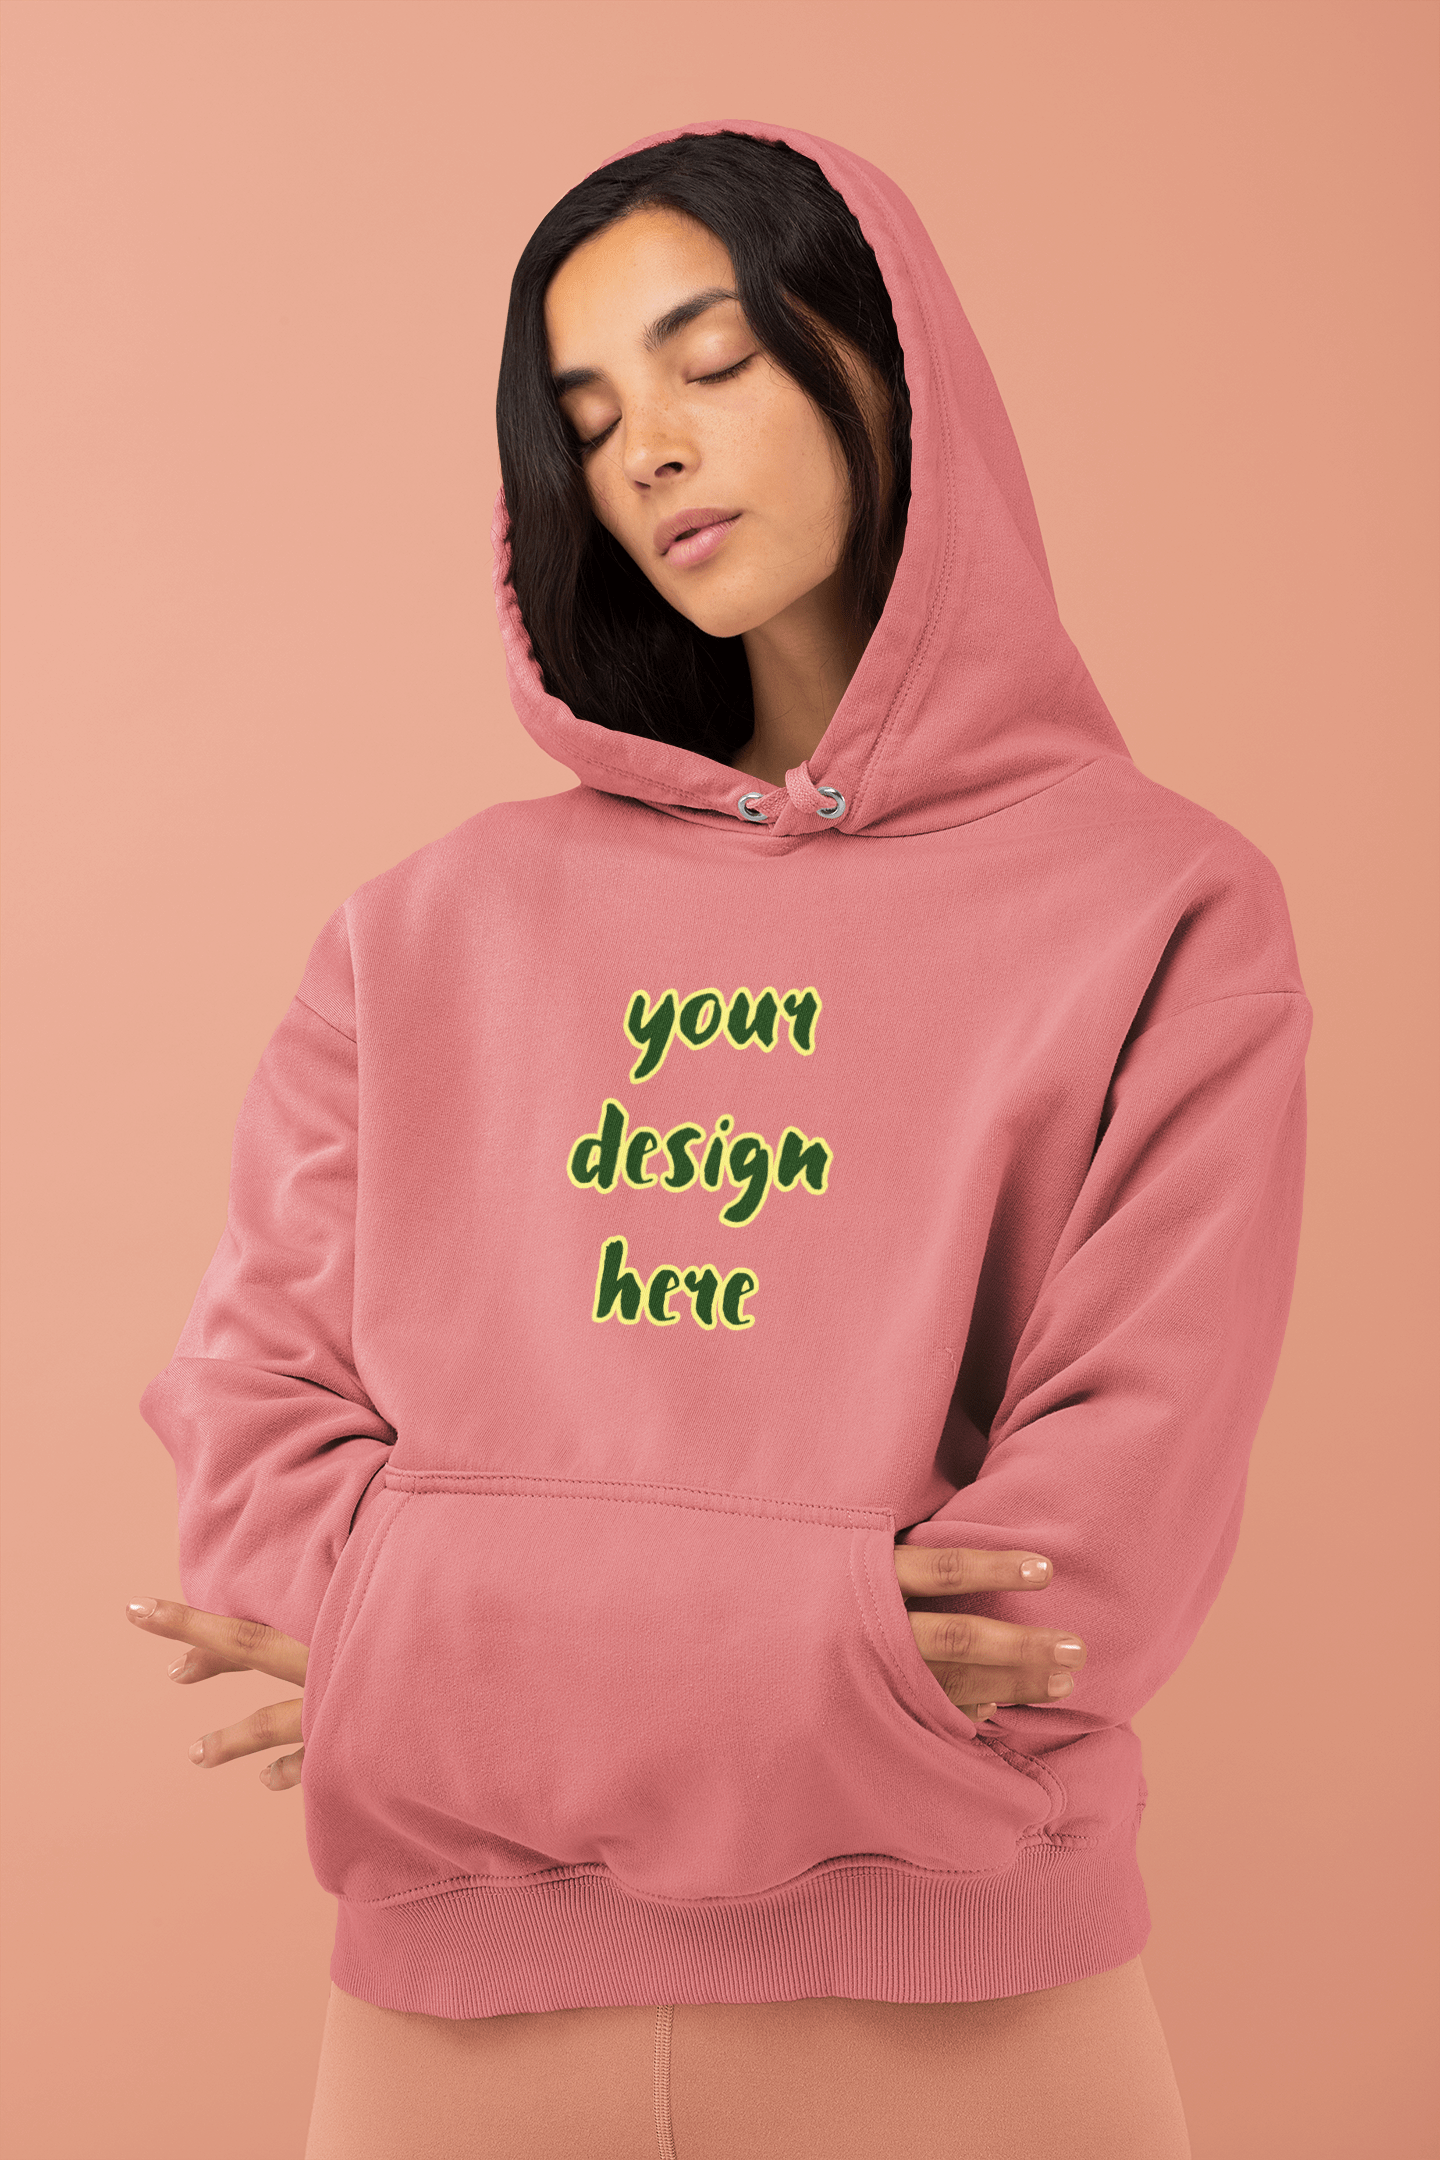 JPG Download Wood Background Blank Women's Black Hoodie Shirt Apparel Mockup Girl's Mock Up Sweater Fashion Styled Stock Photography